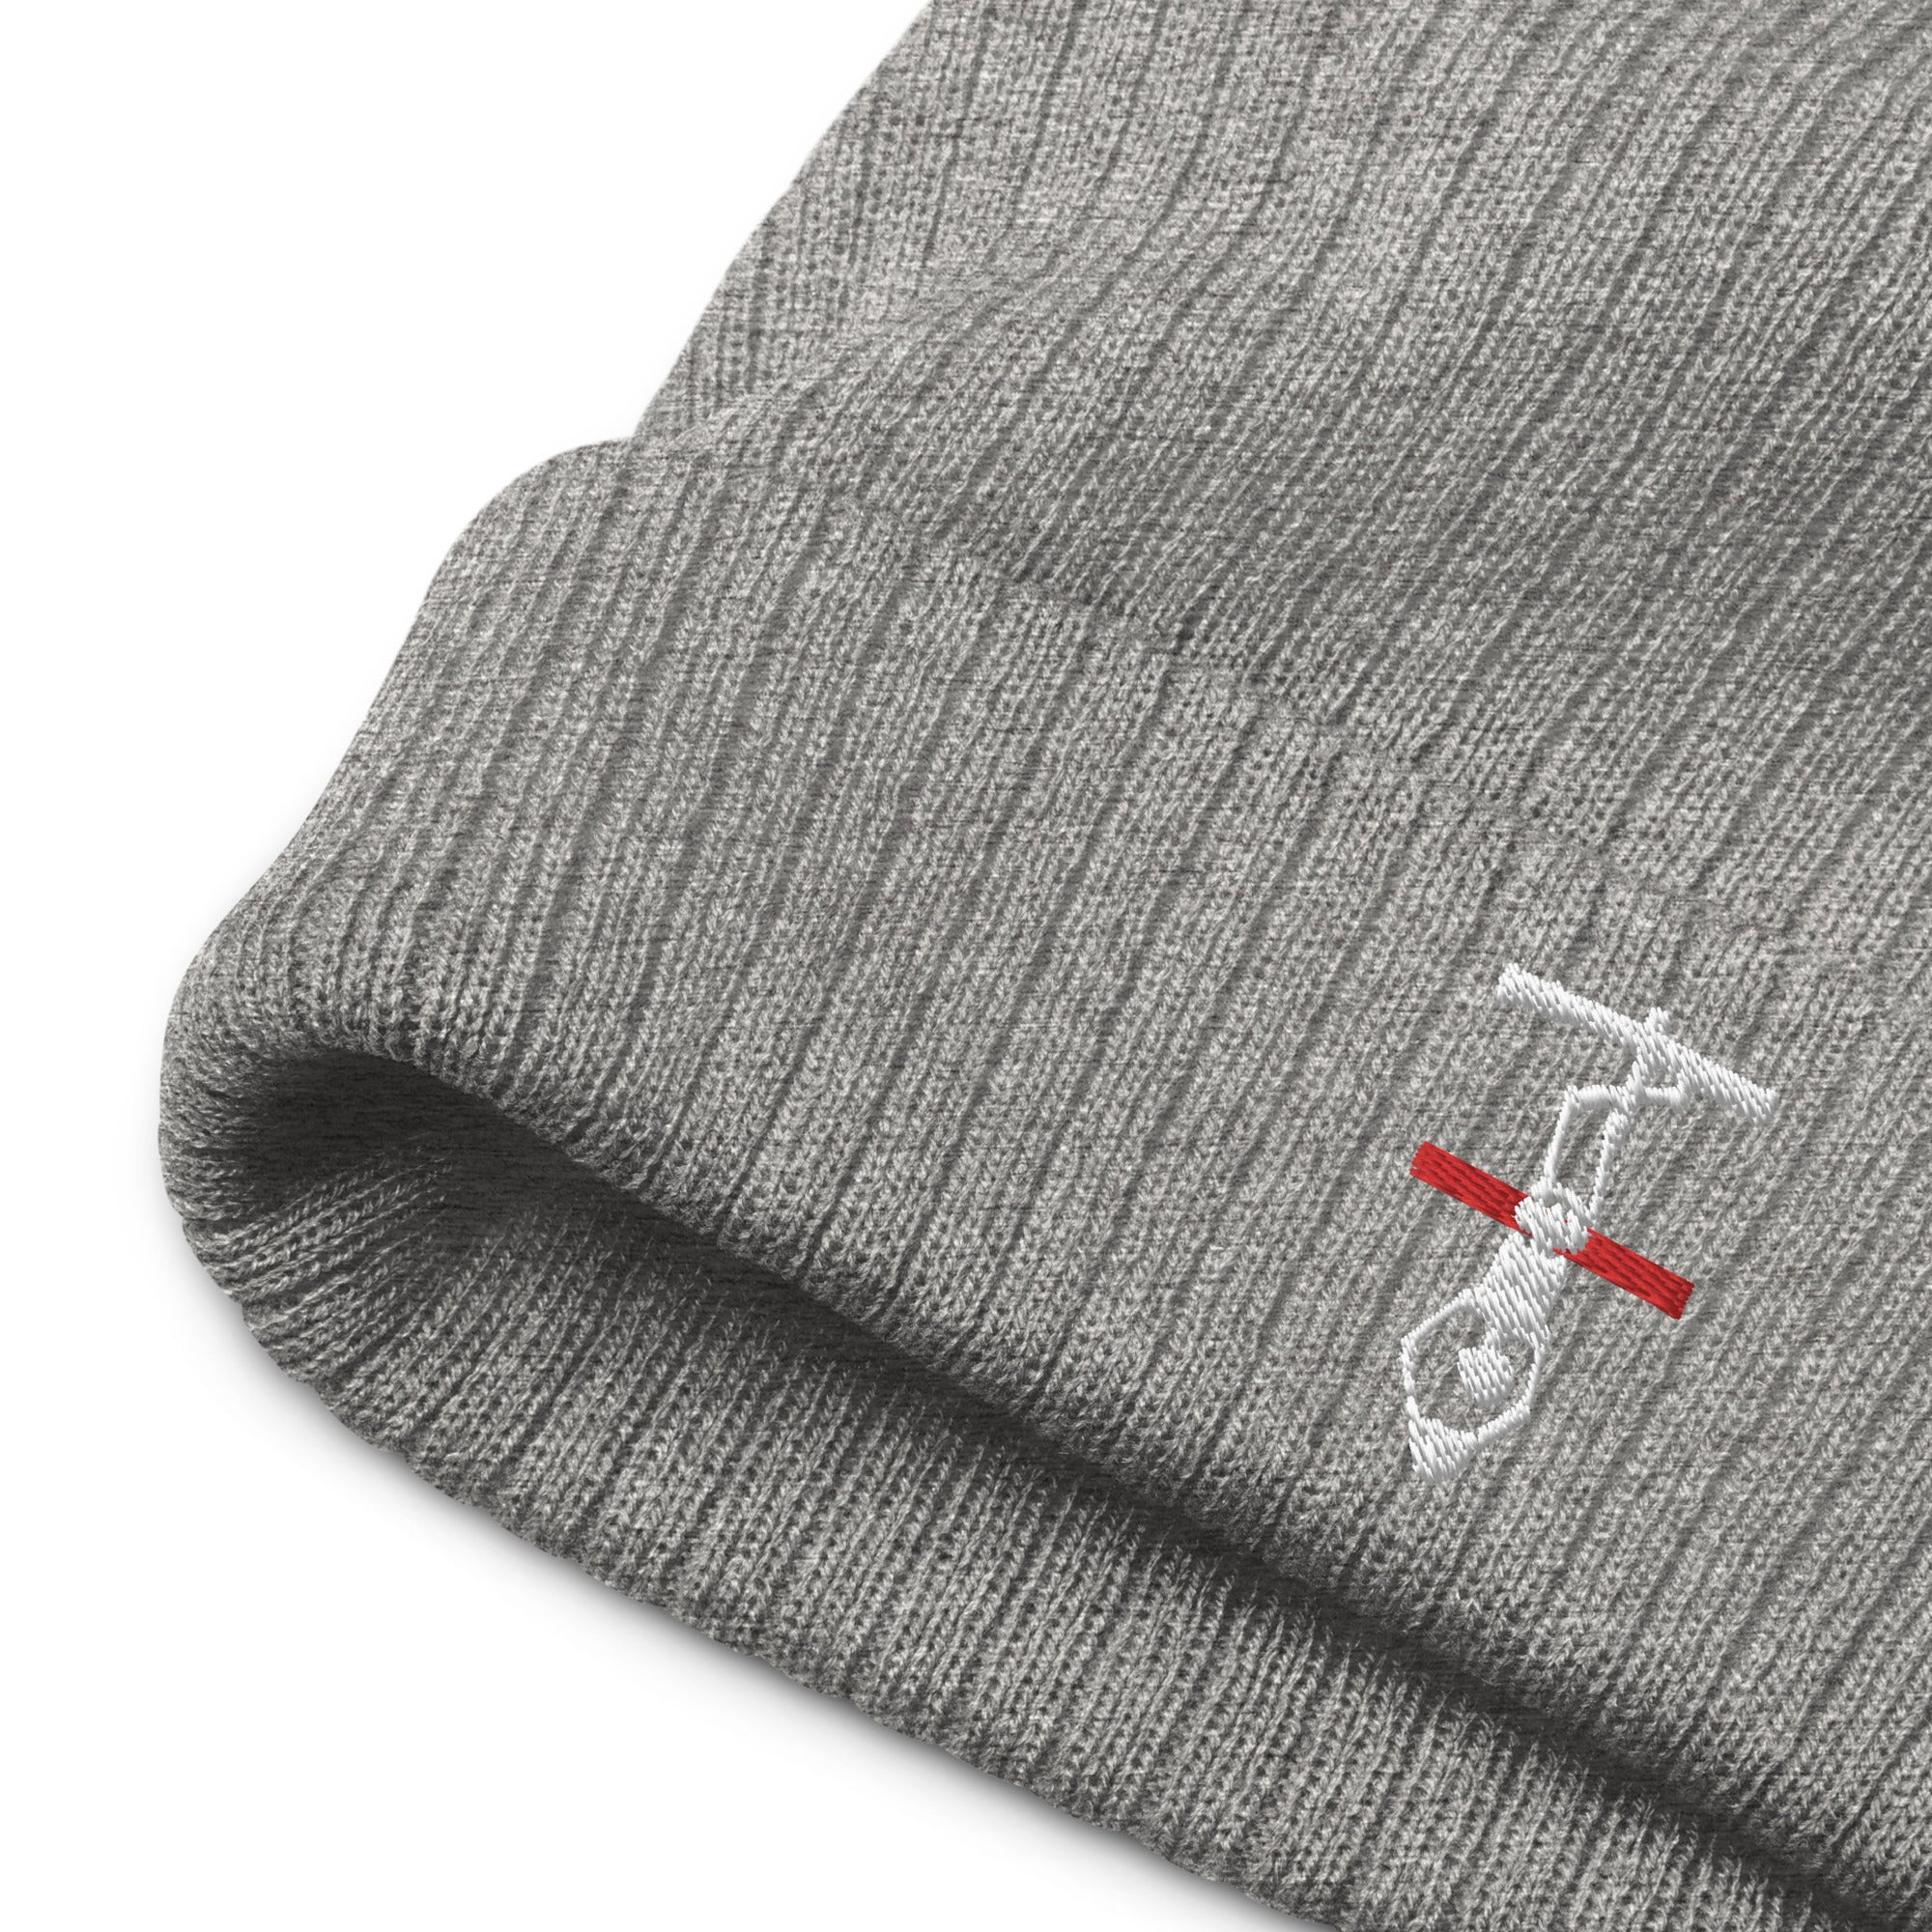 Thin Red Line Ribbed knit beanie - White Logo